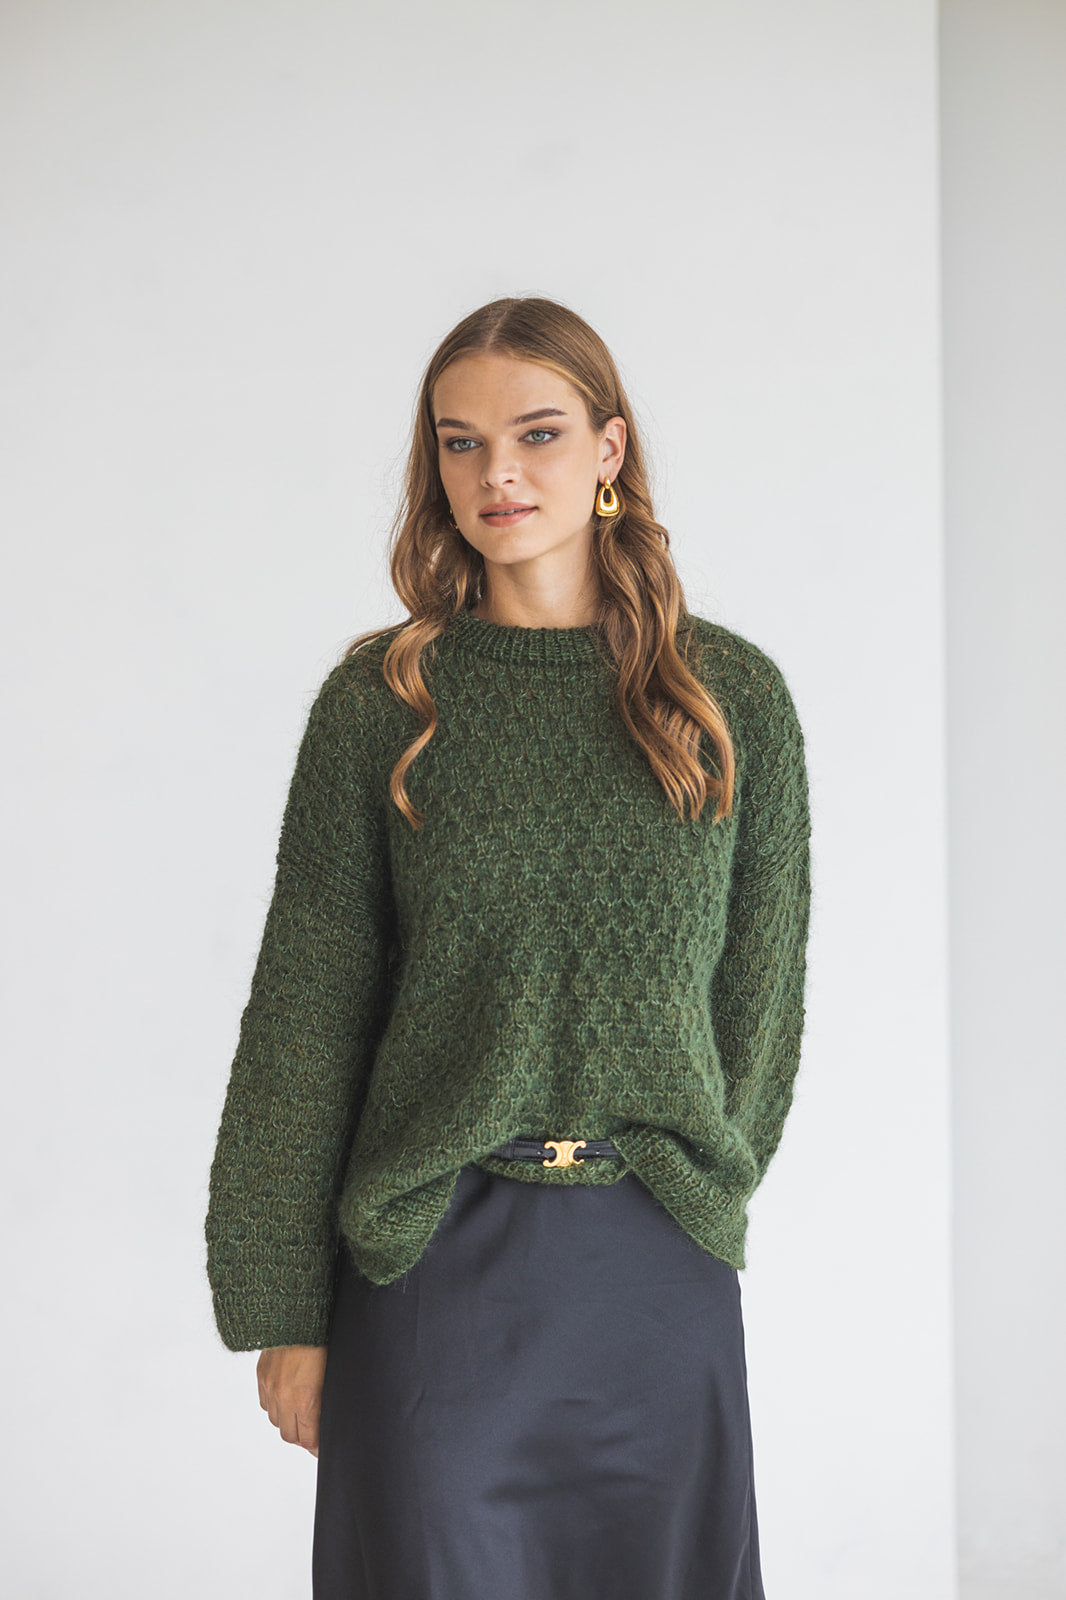 Green mohair knitted sweater, wide sleeves alpaca wool blend jumper, fuzzy cable knit pullover, fluffy slightly oversized thick sweater gift